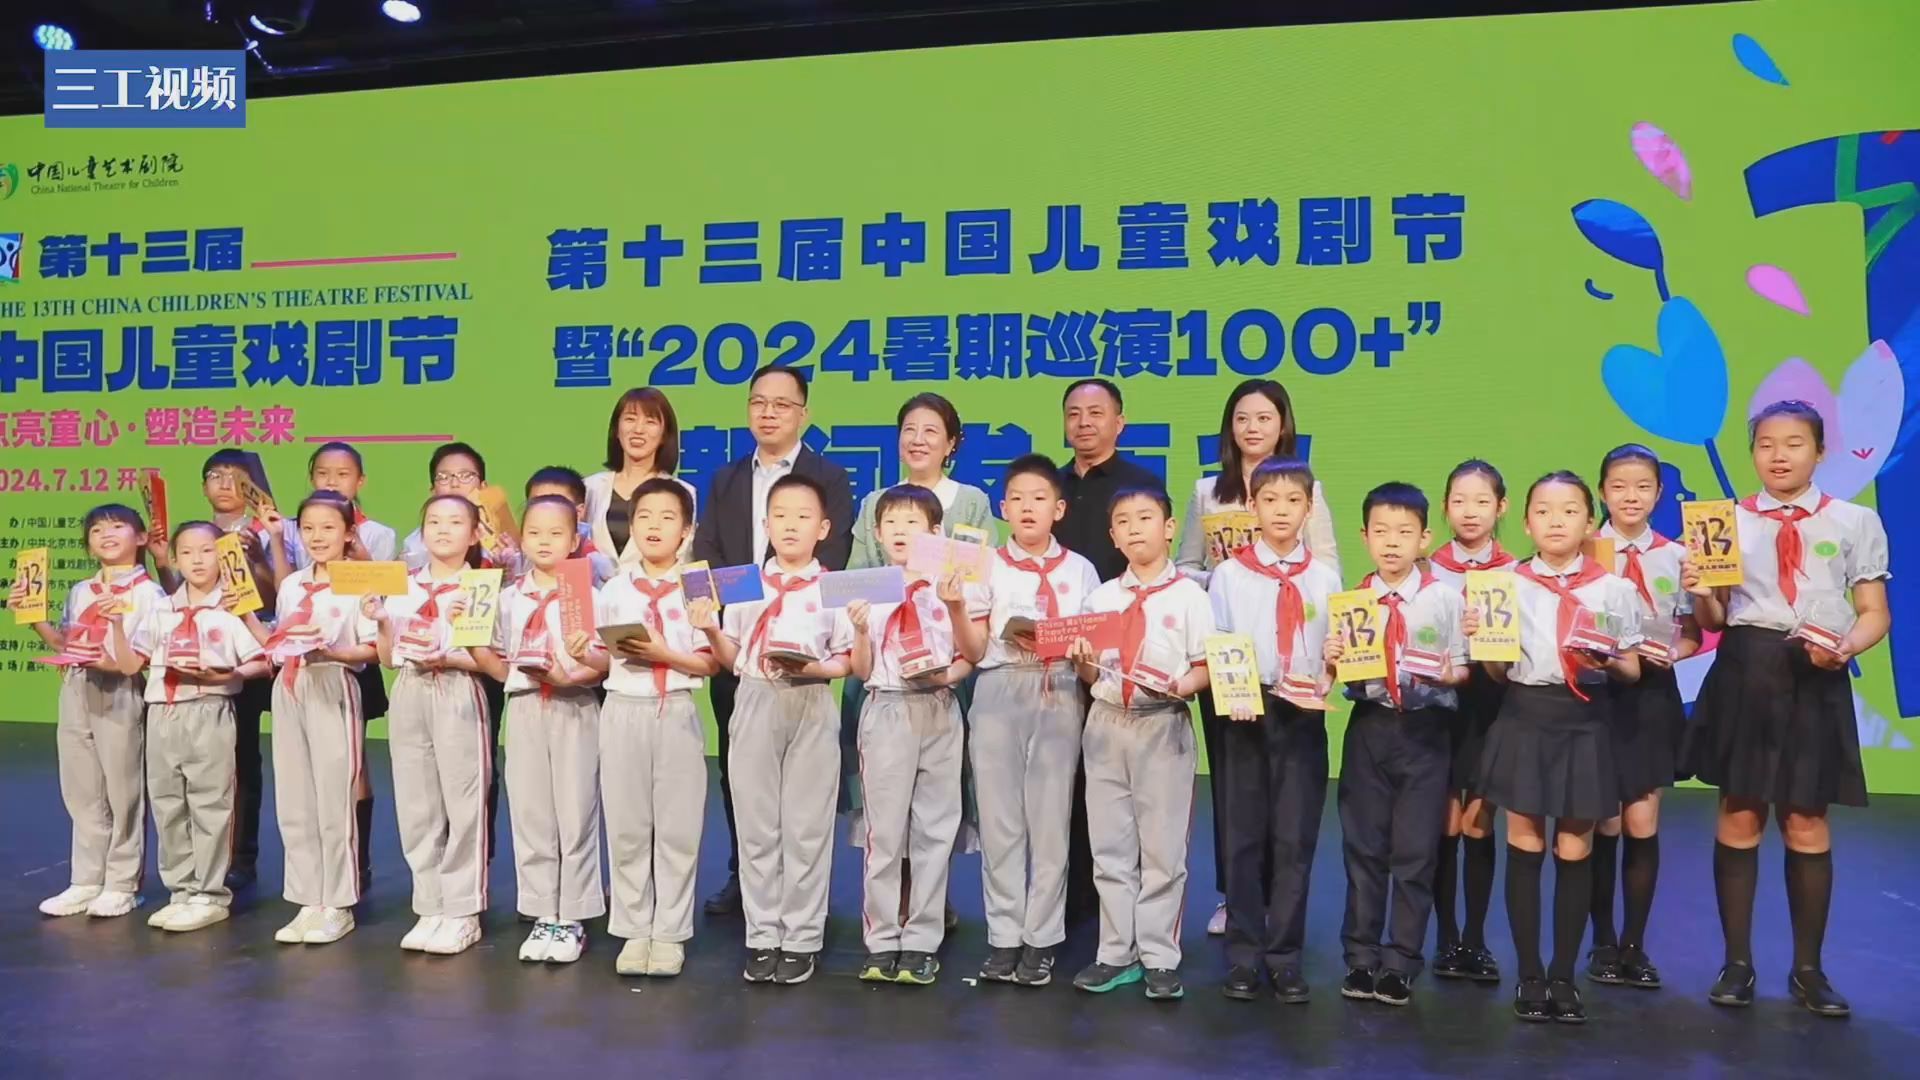  The 13th China Children's Drama Festival will be held soon, which will gather 33 plays from 8 countries in 38 days